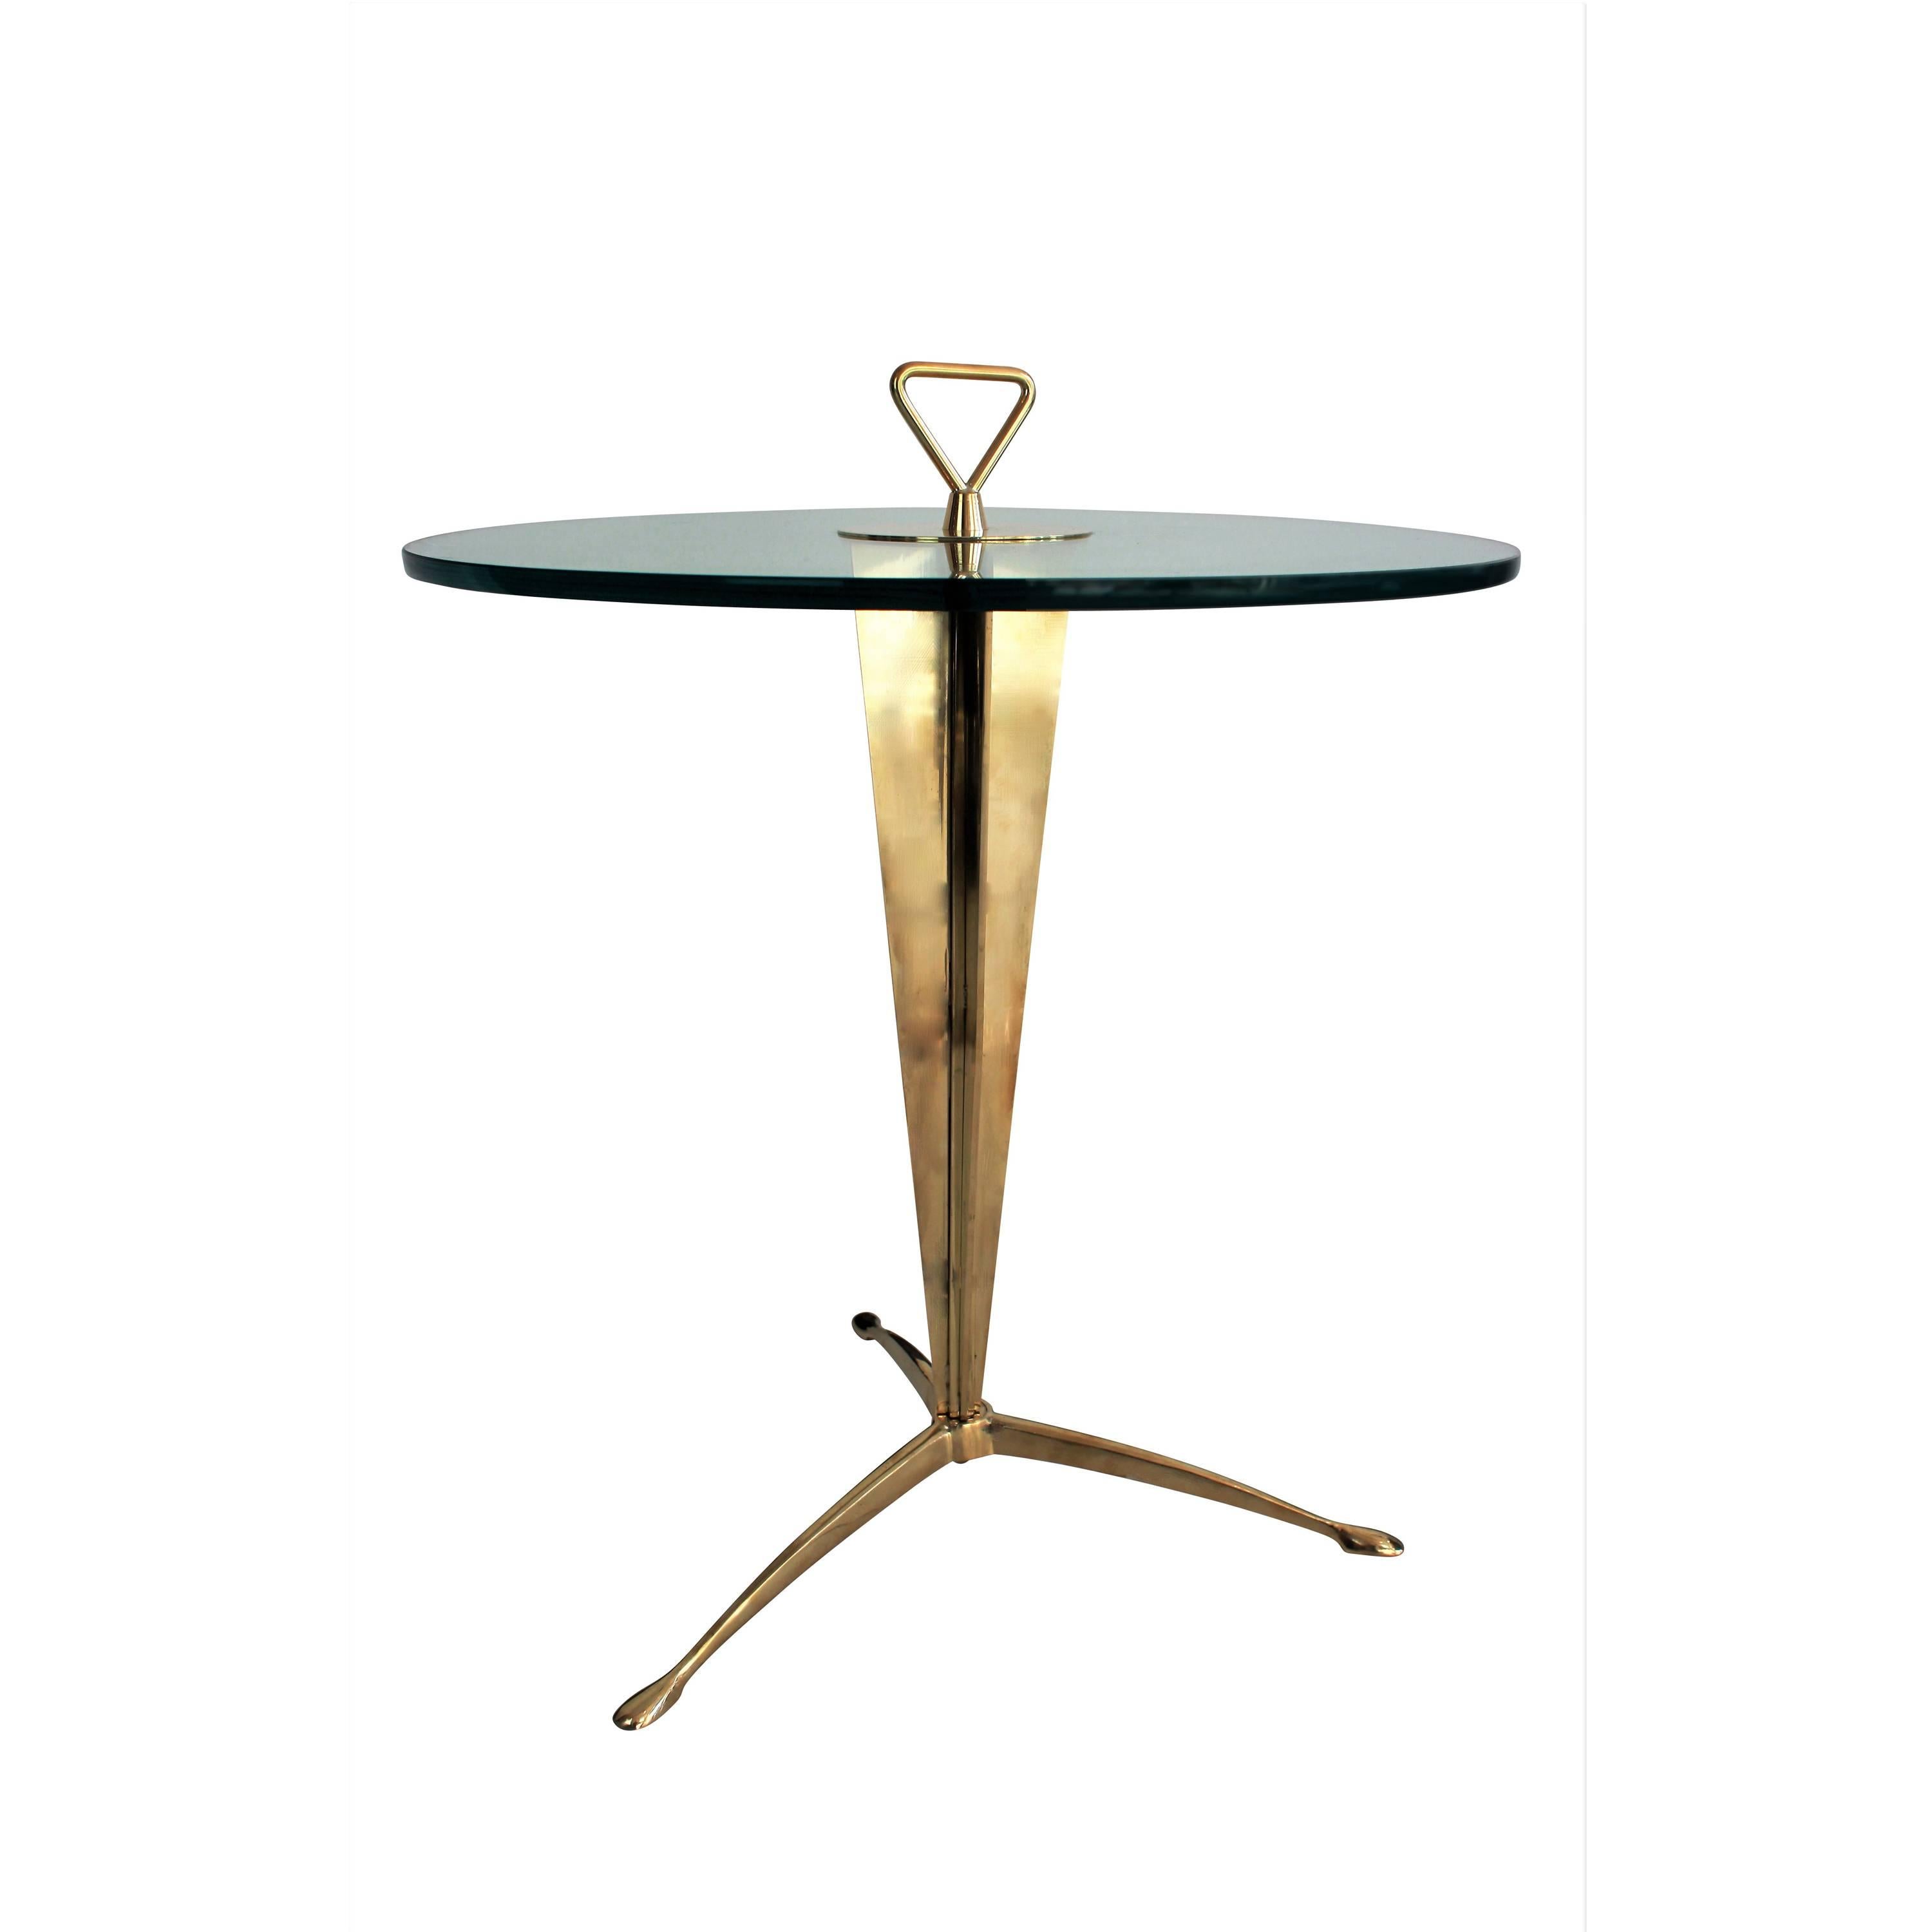 Italian Pair of Gilded Bronze and Glass Tripod Side Tables, circa 1970